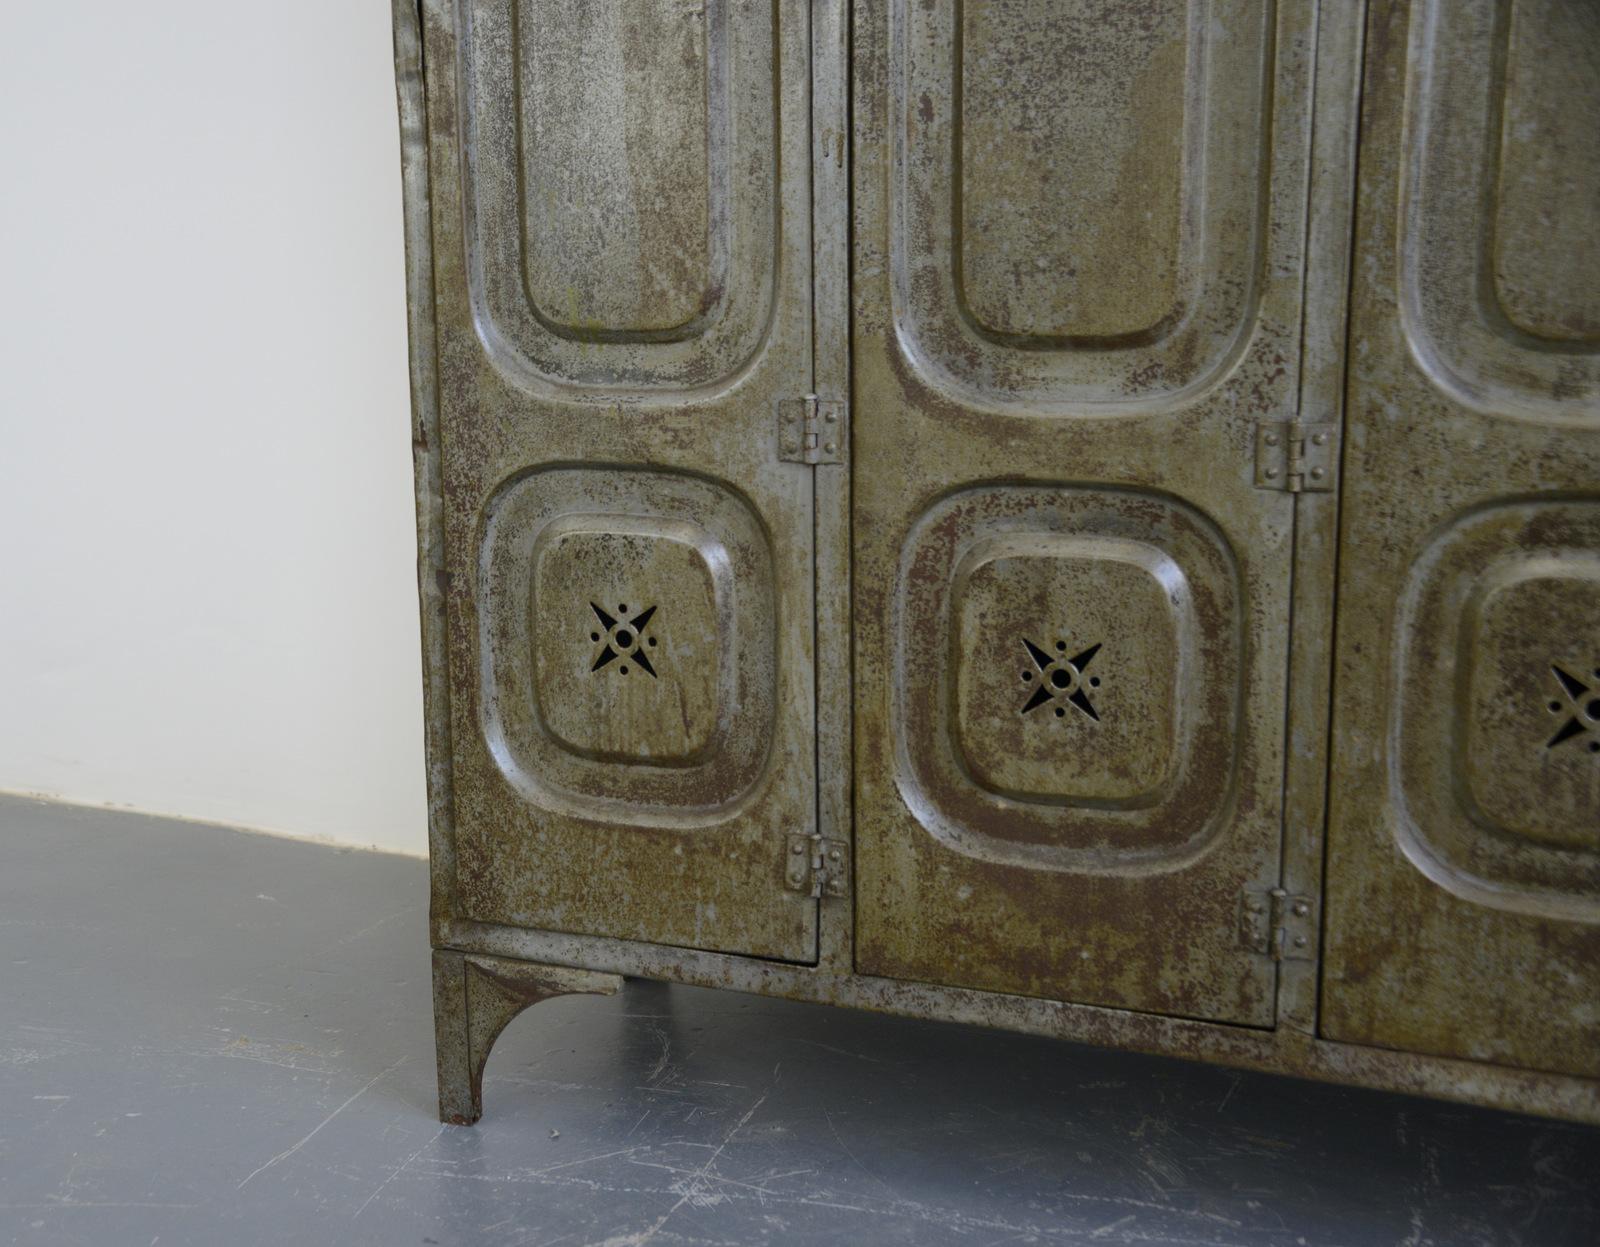 Early 20th century German factory lockers 

- Pressed steel with star detail vents
- Original grey paint
- Each locker compartment has 4 hanging hooks and a shelf
- Made by Kuppersbusch
- German ~ 1900
- Measures: 192cm tall x 141cm wide x